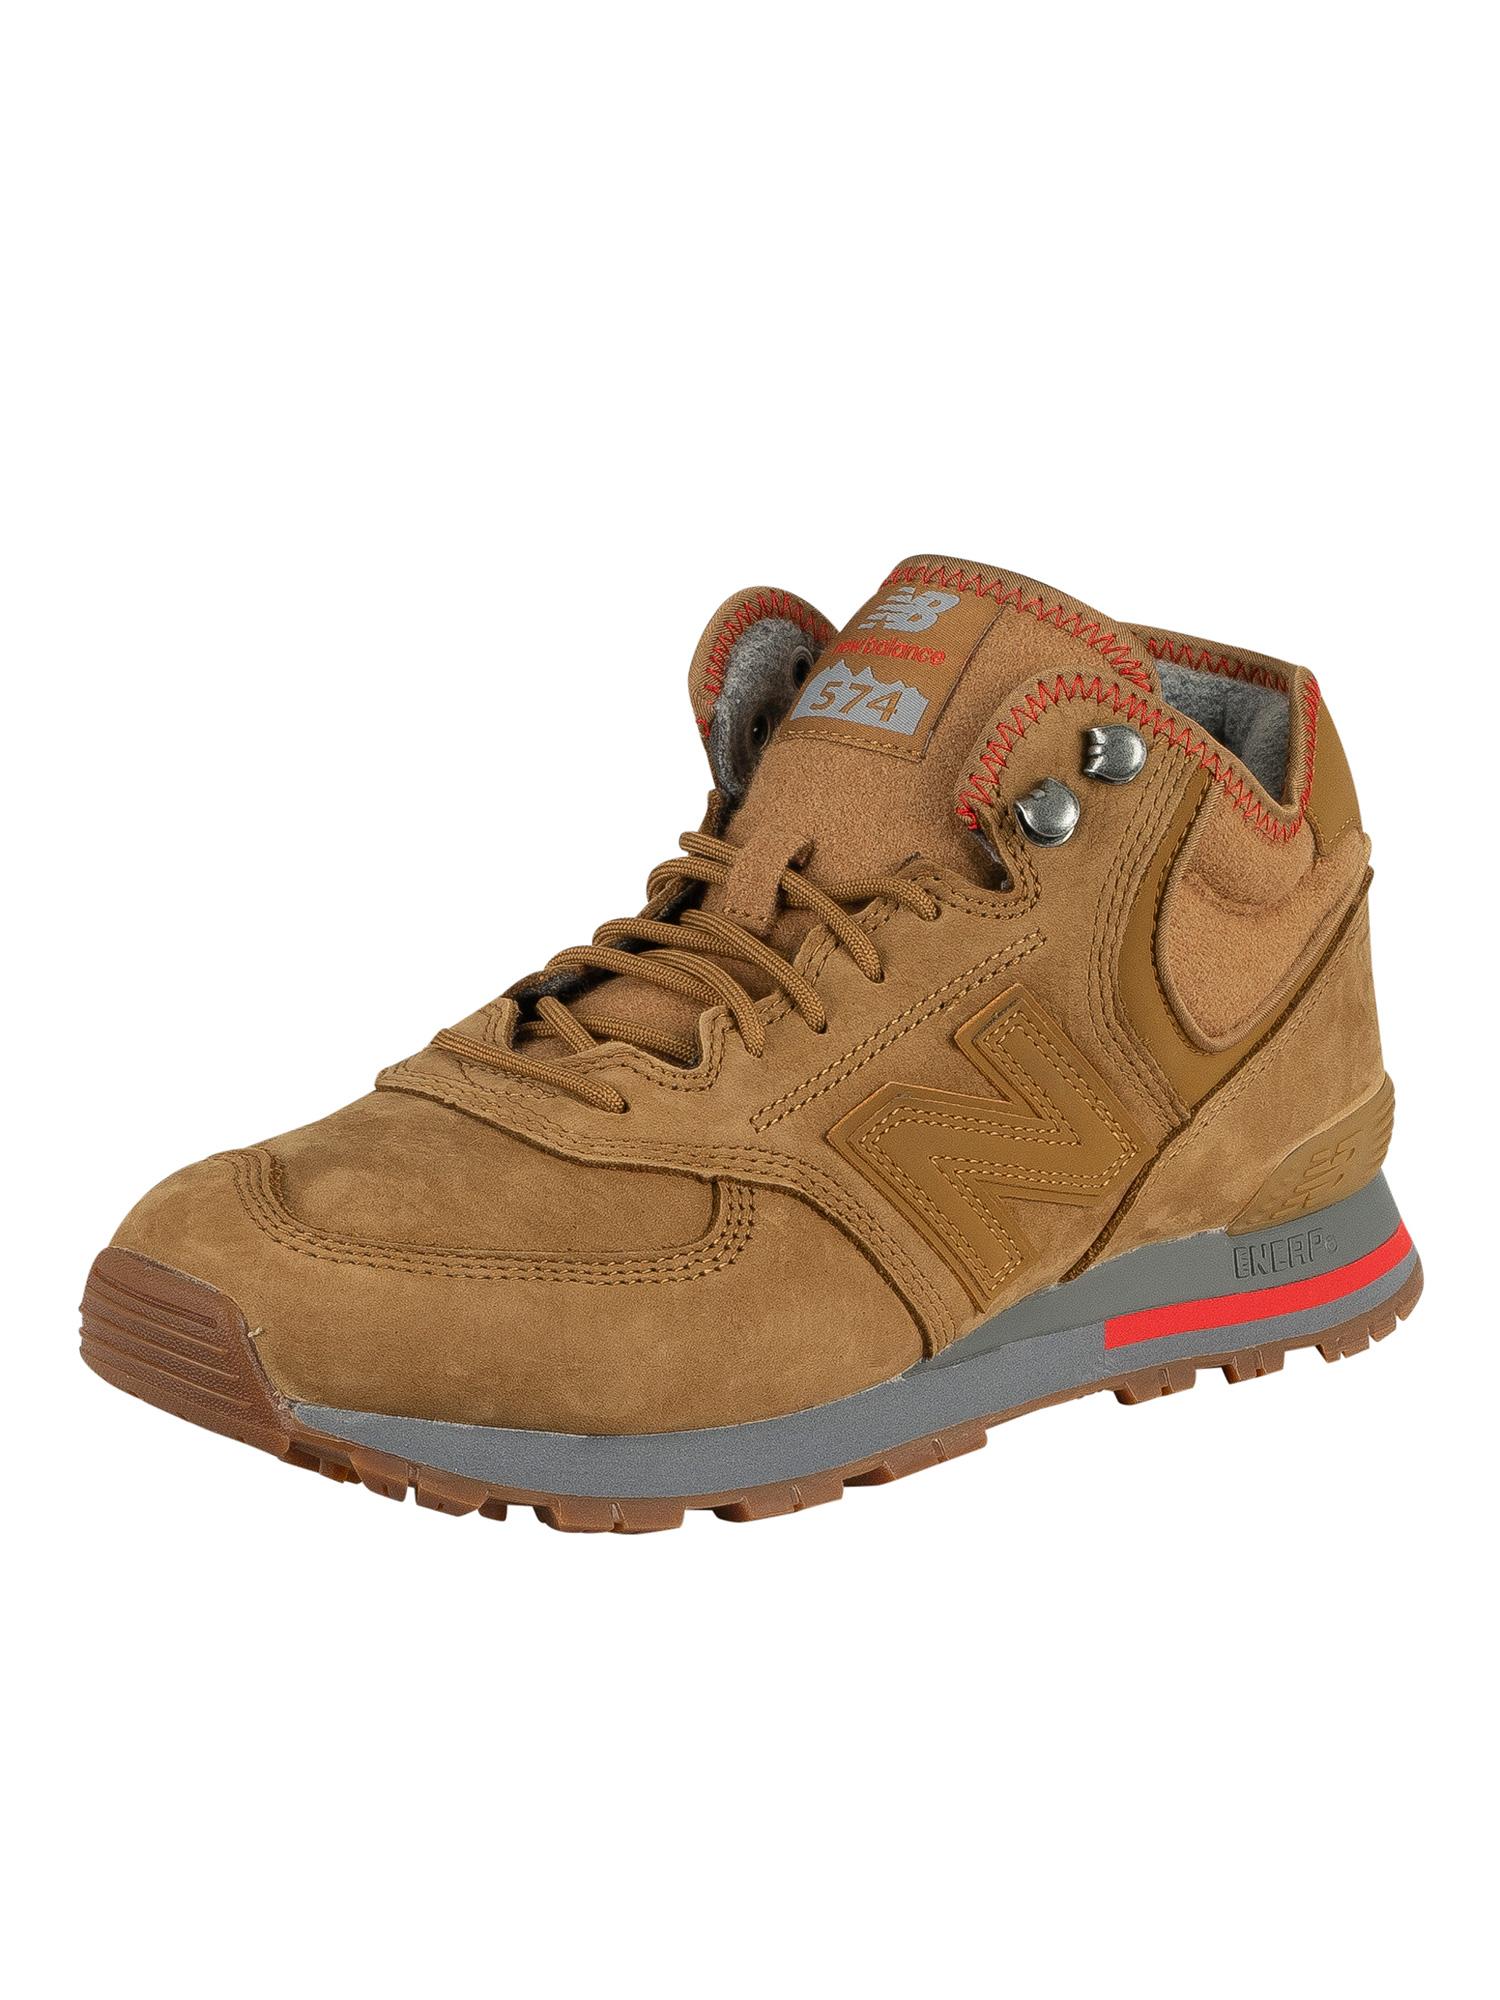 New Balance 574 Mid Premium Hiker Trainers In Brown For Men | Lyst